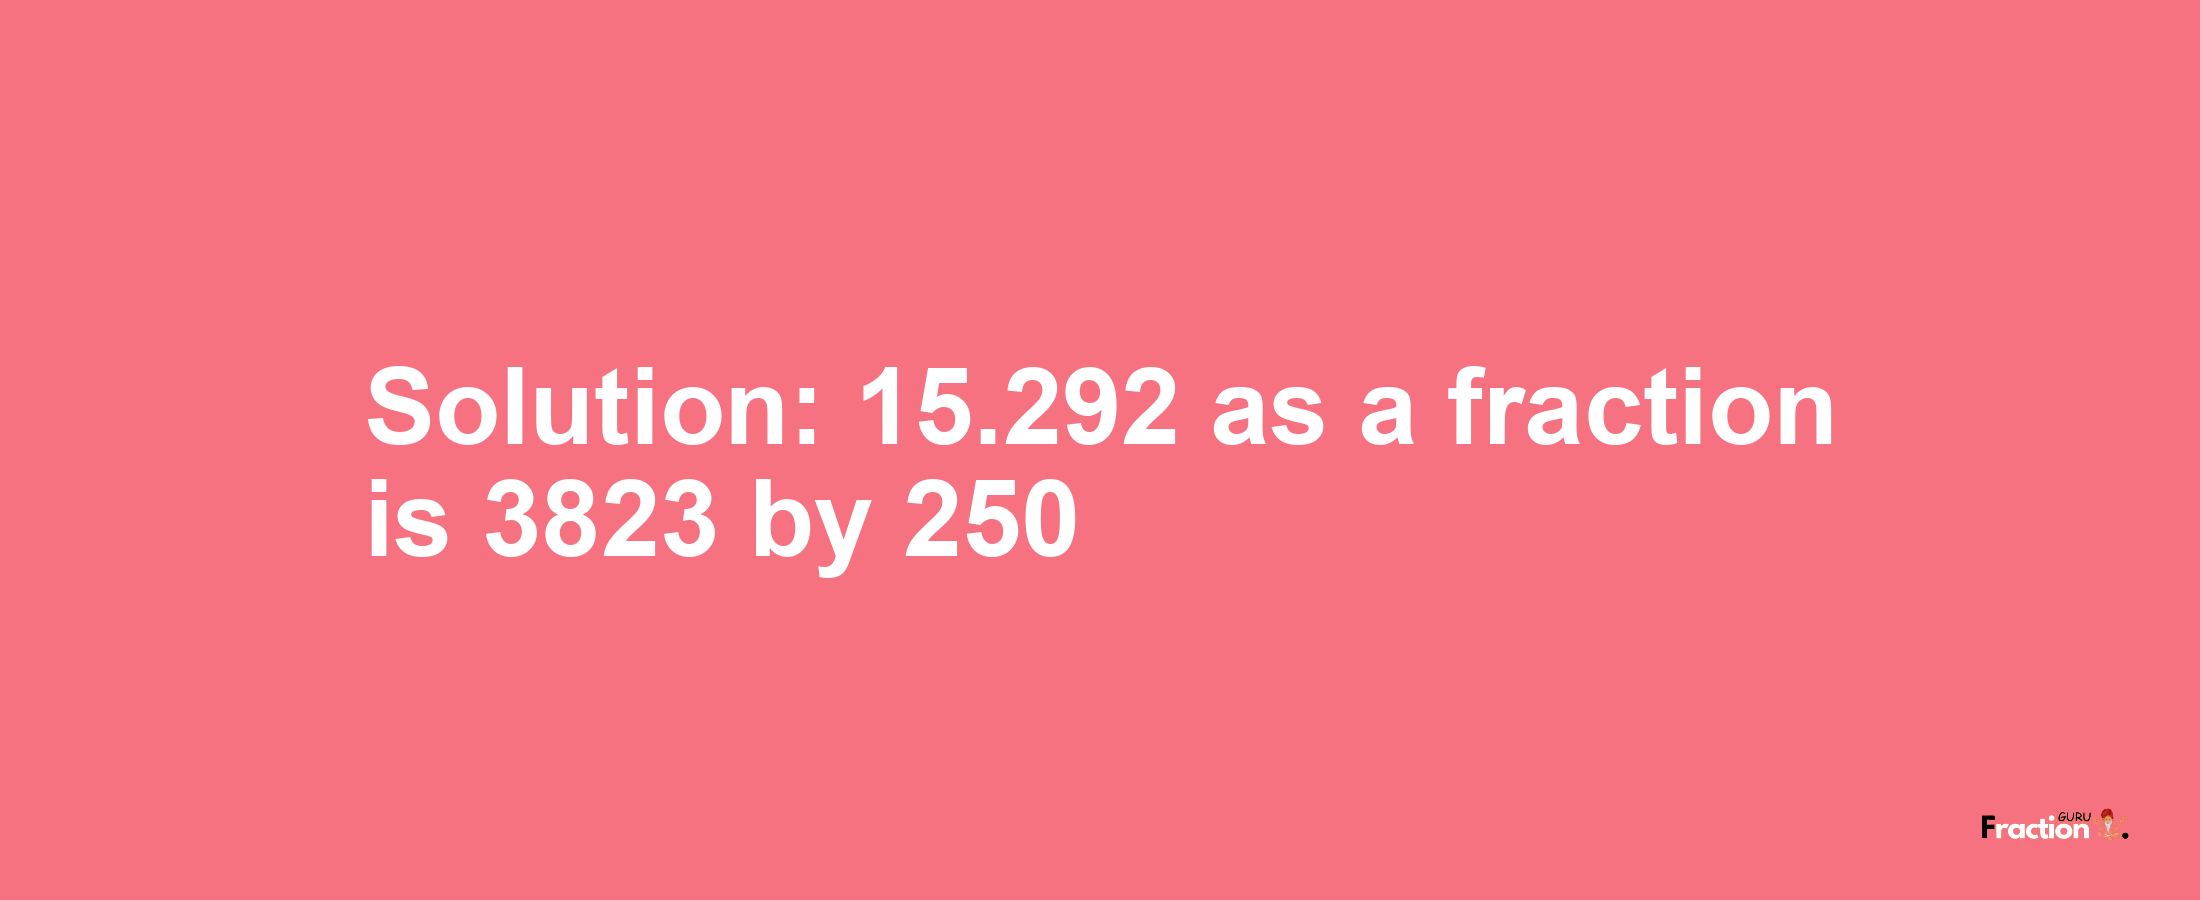 Solution:15.292 as a fraction is 3823/250